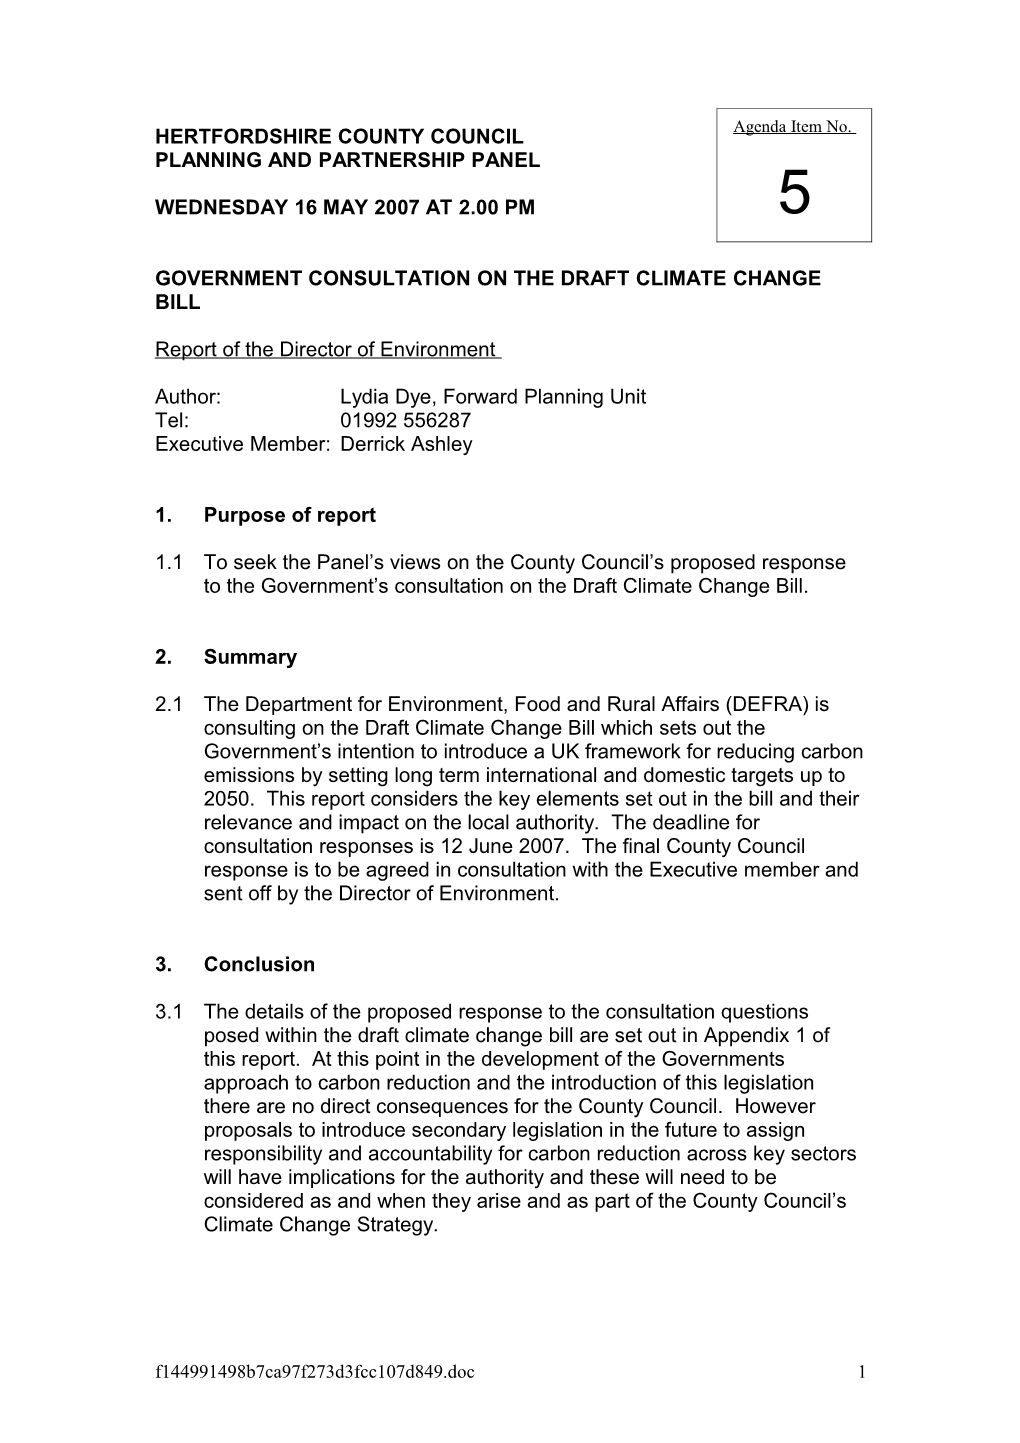 Government Consultation on the Draft Climate Change Bill